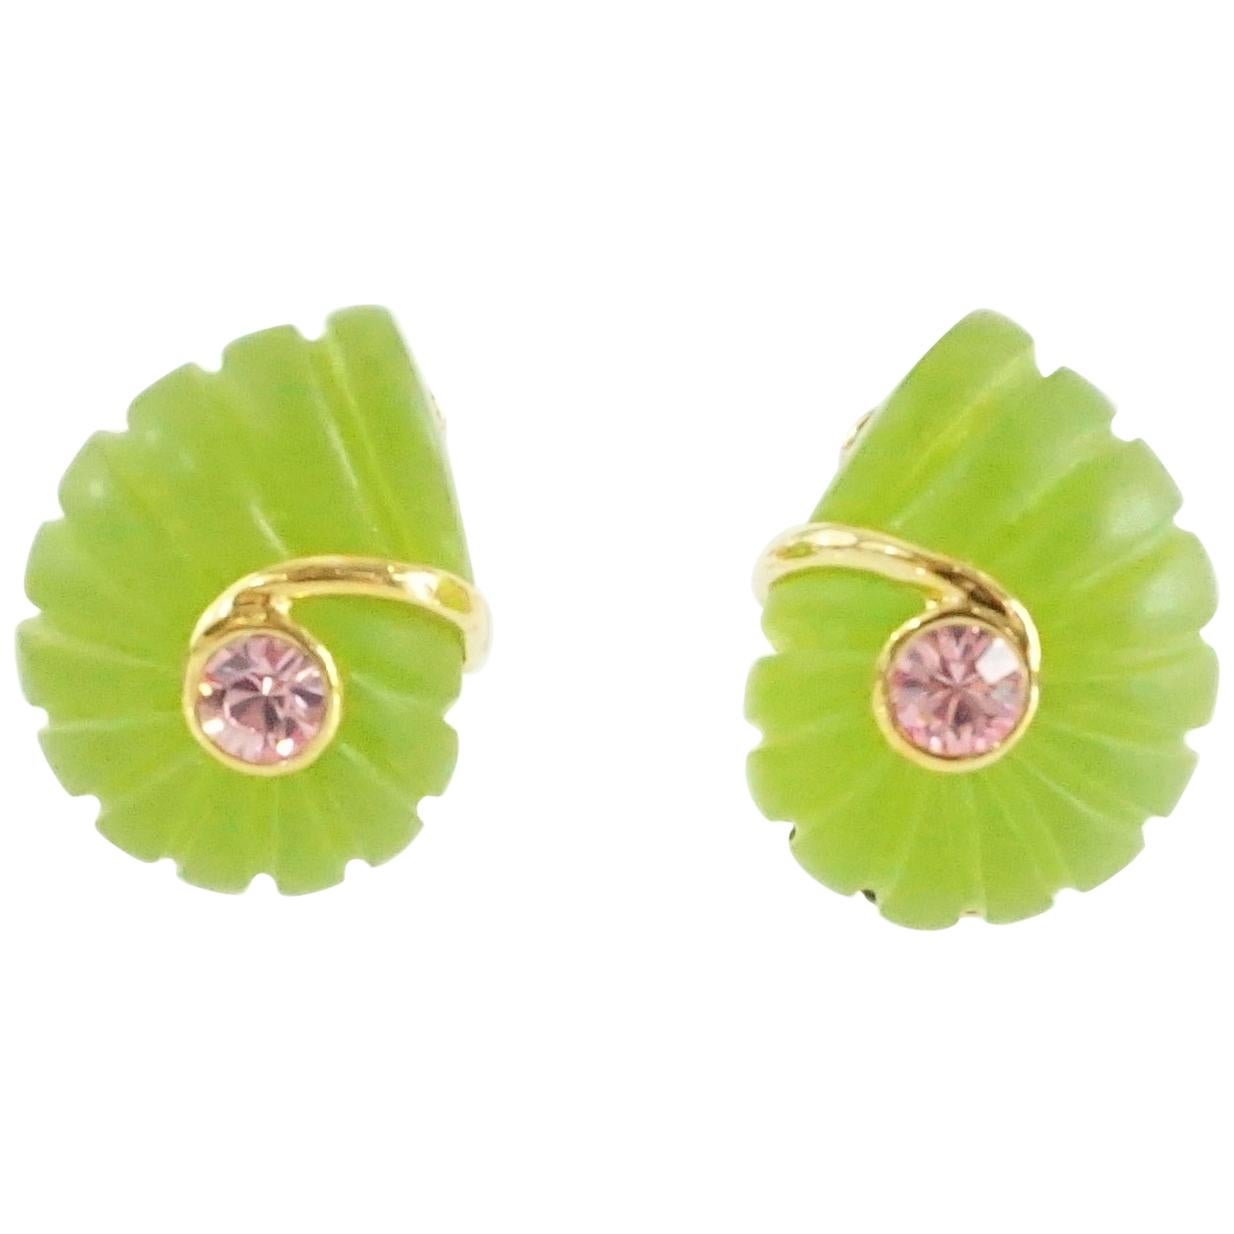 Replica Green Spiral with a Pink Stone Clip Earrings with Gold Detailing